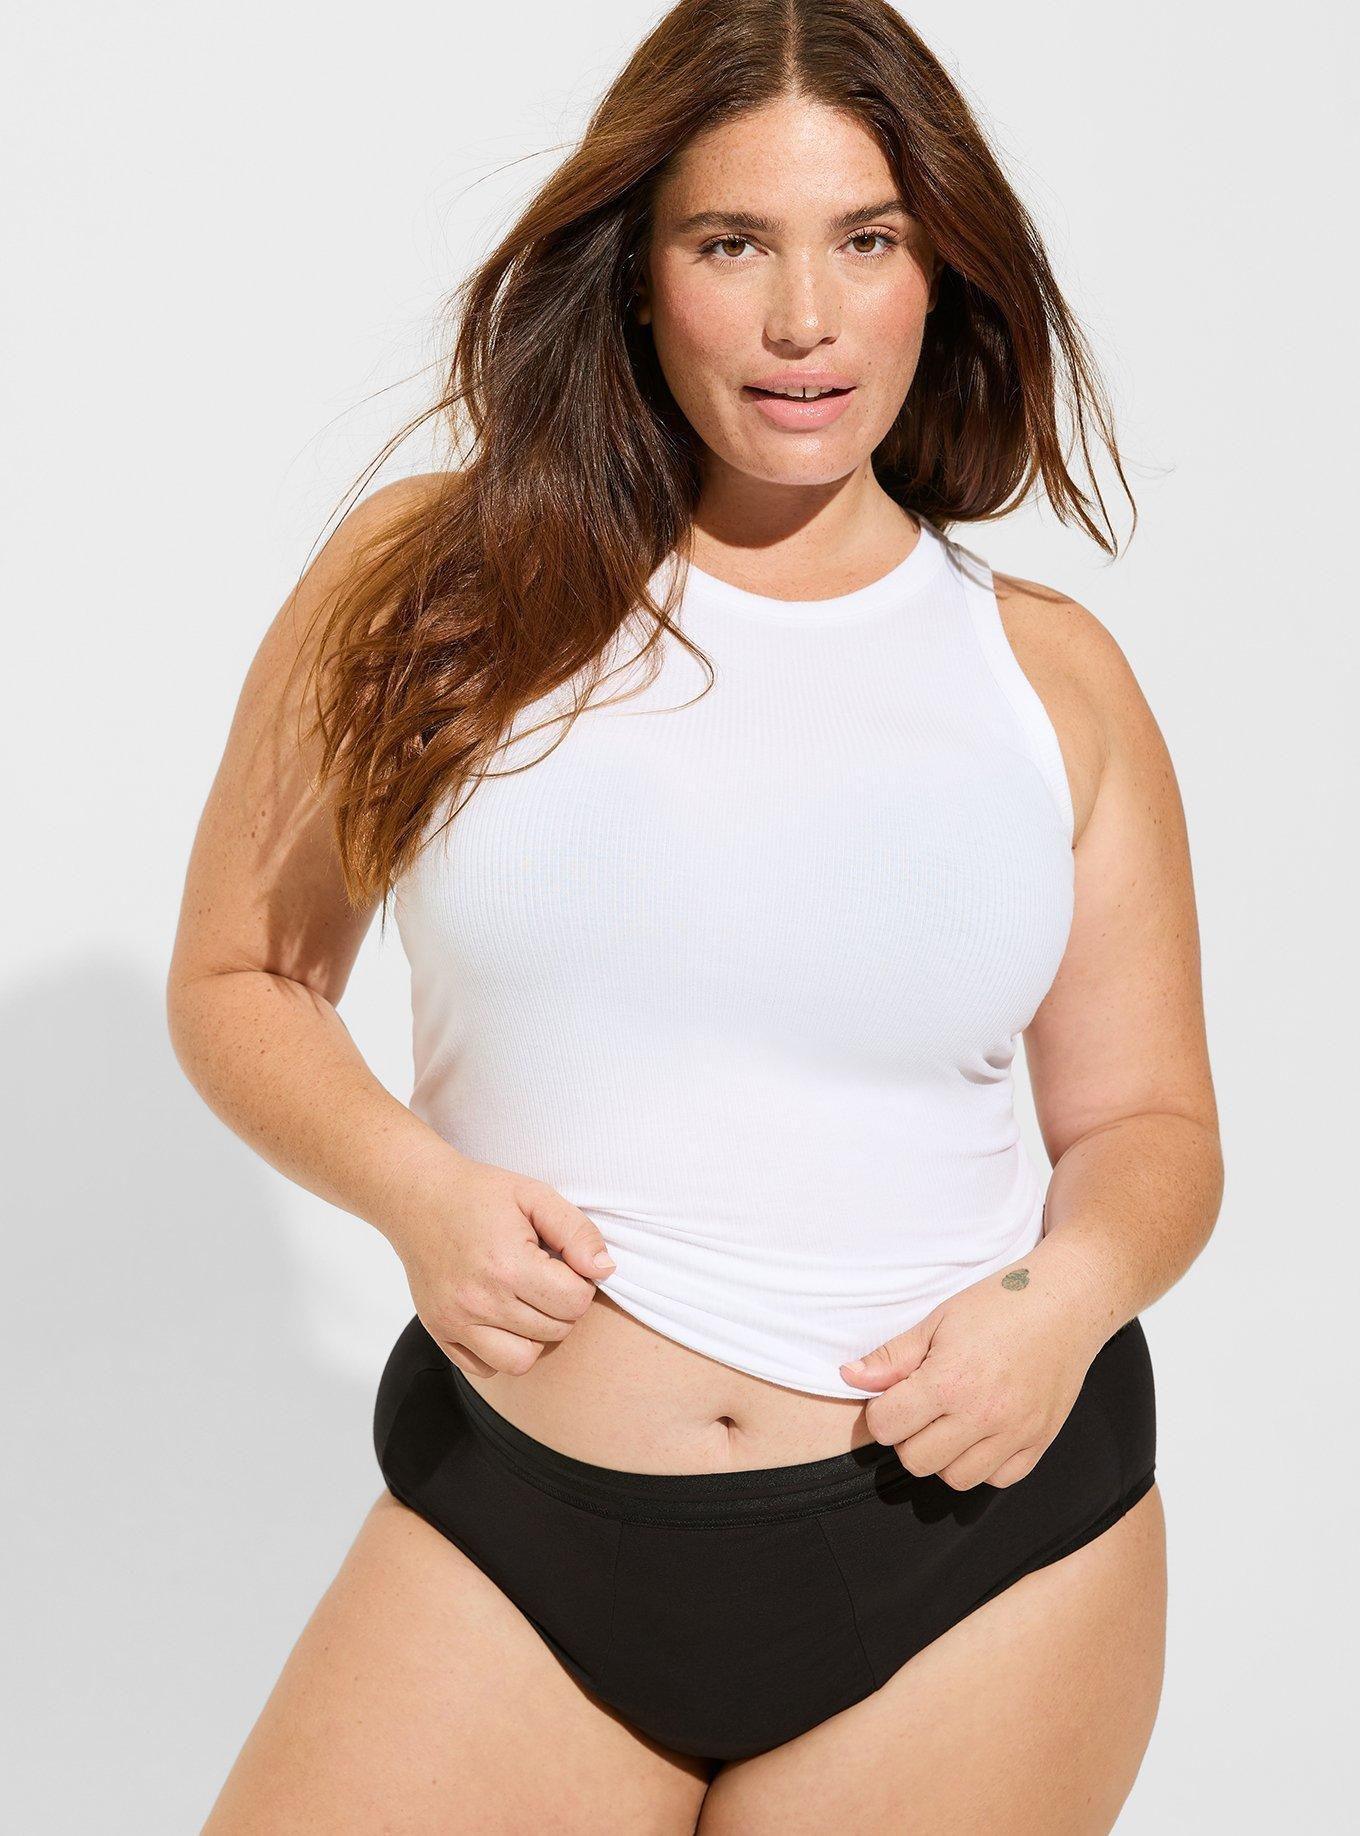 Plus Size - Leakproof Cotton Mid Rise Hipster Panty - Torrid